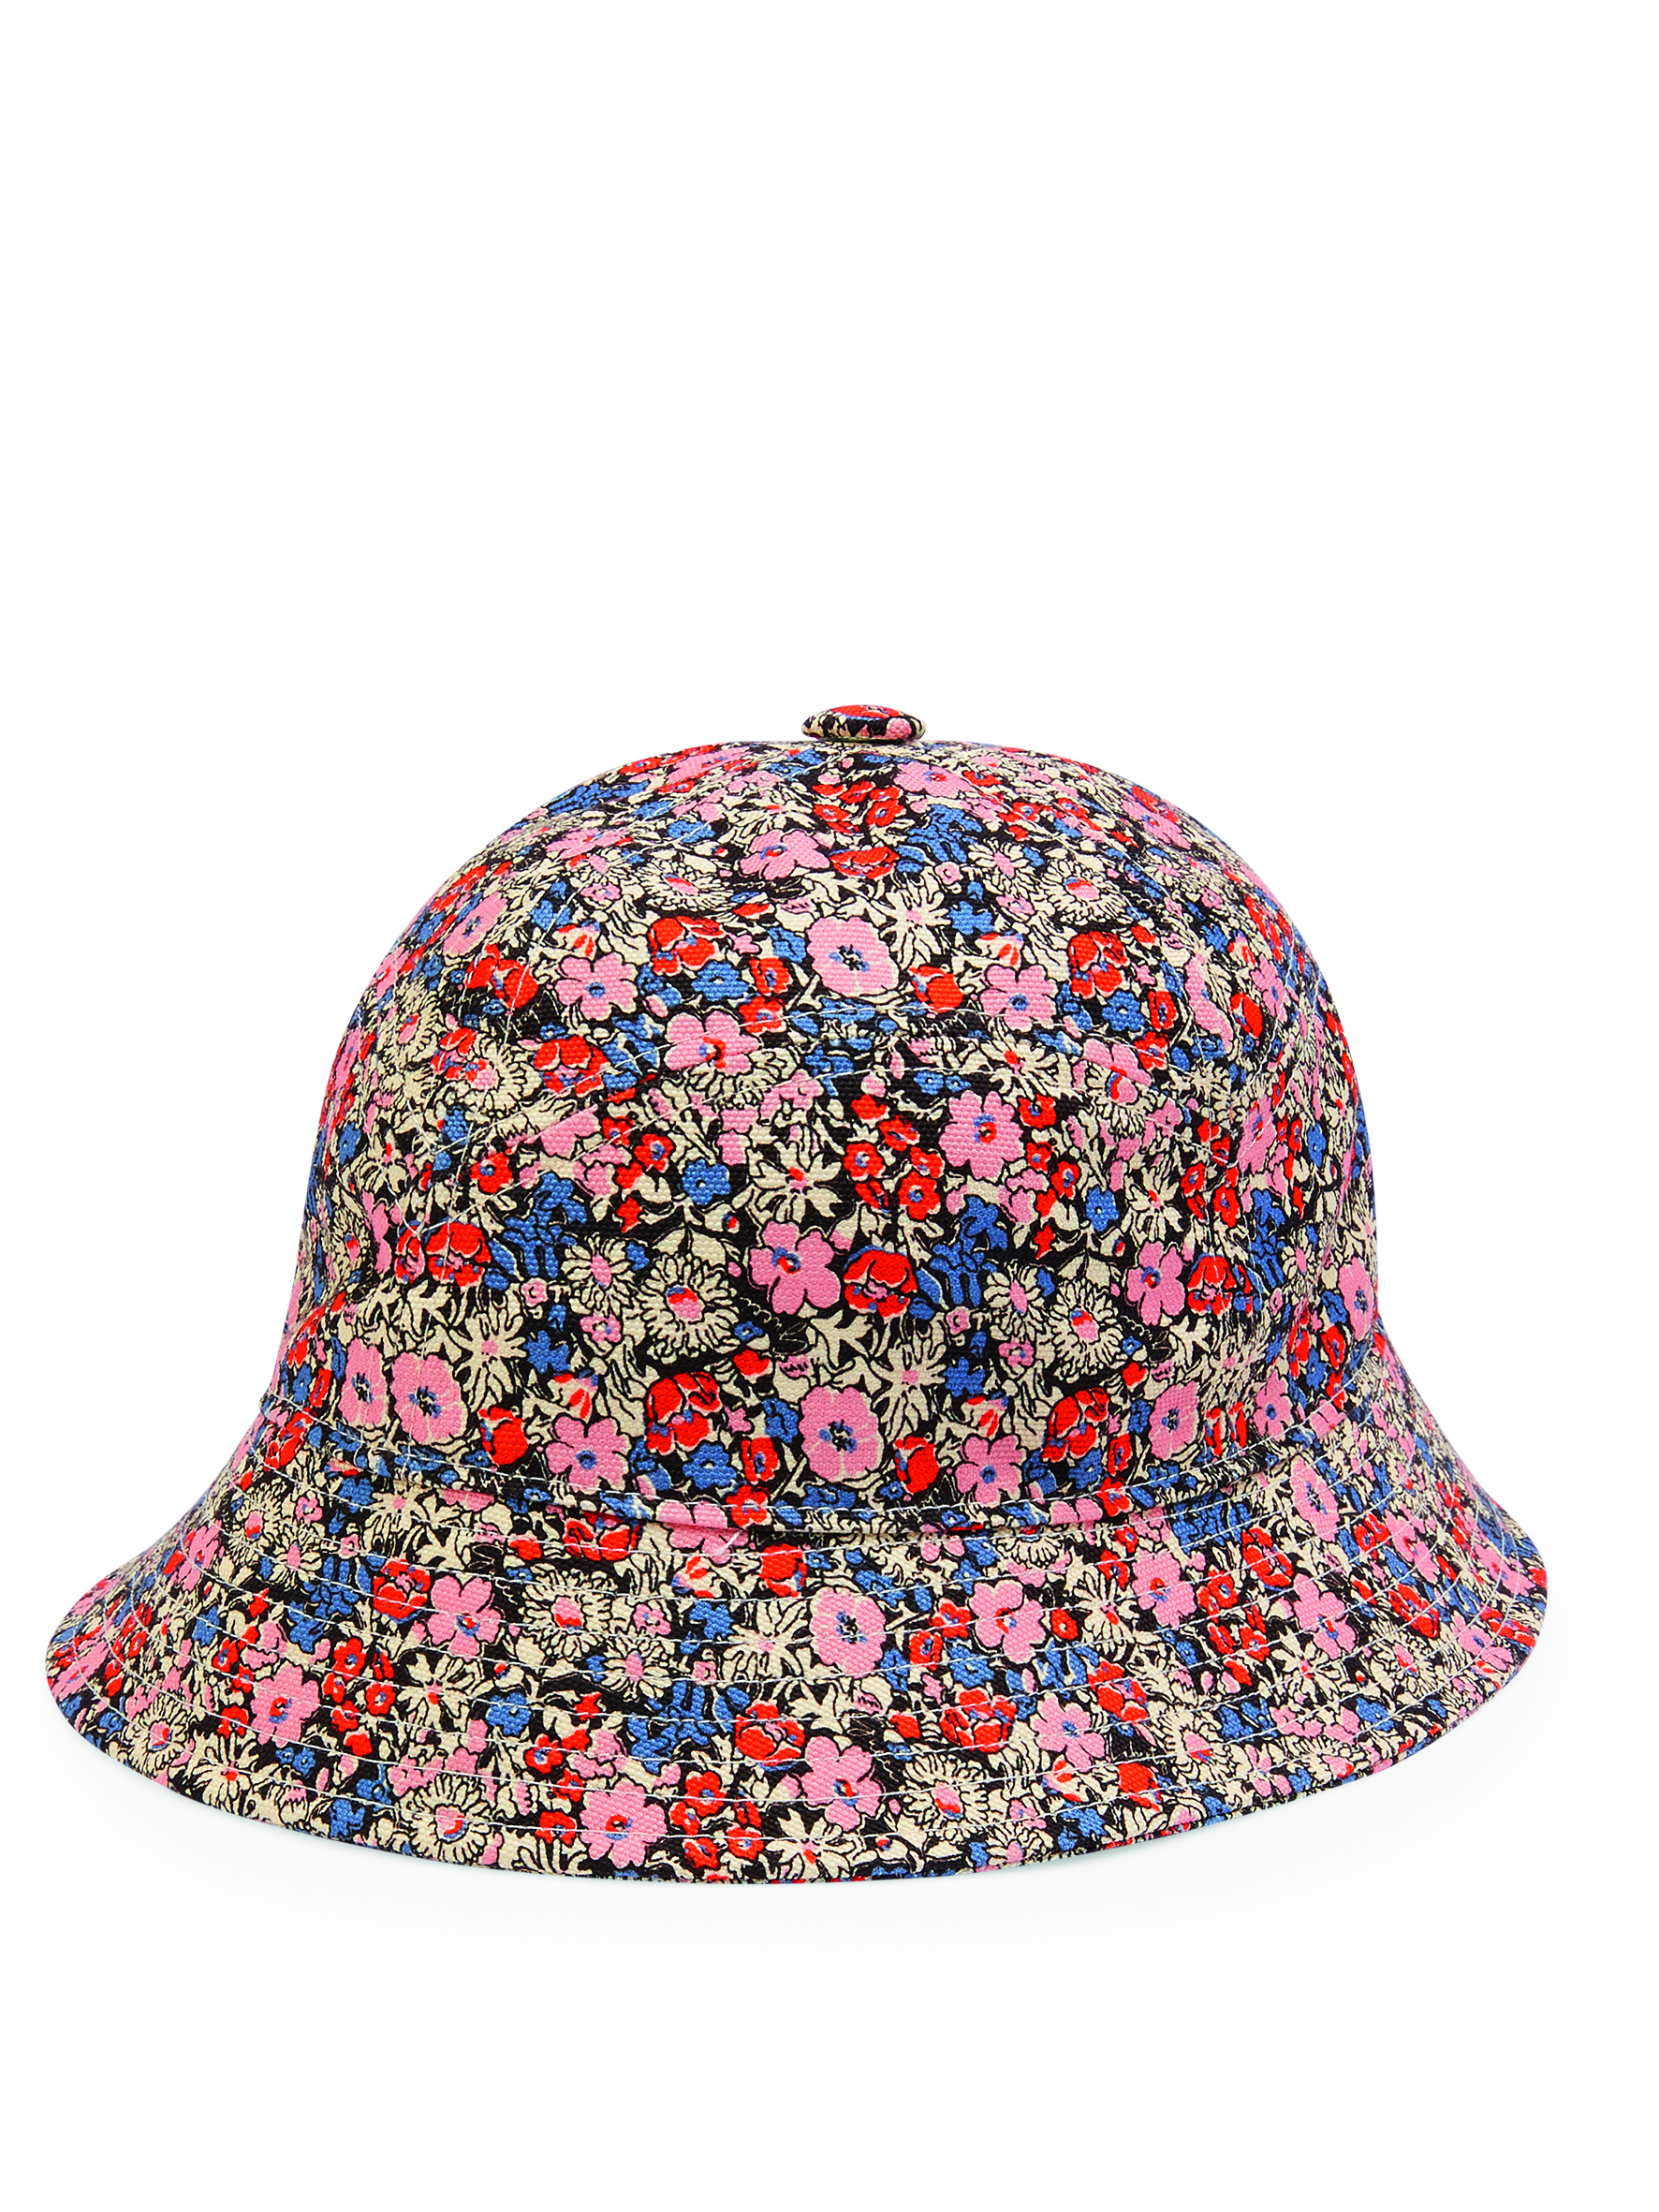 The Gucci Liberty Collection is Big on Vintage Flower Power - Men's Folio